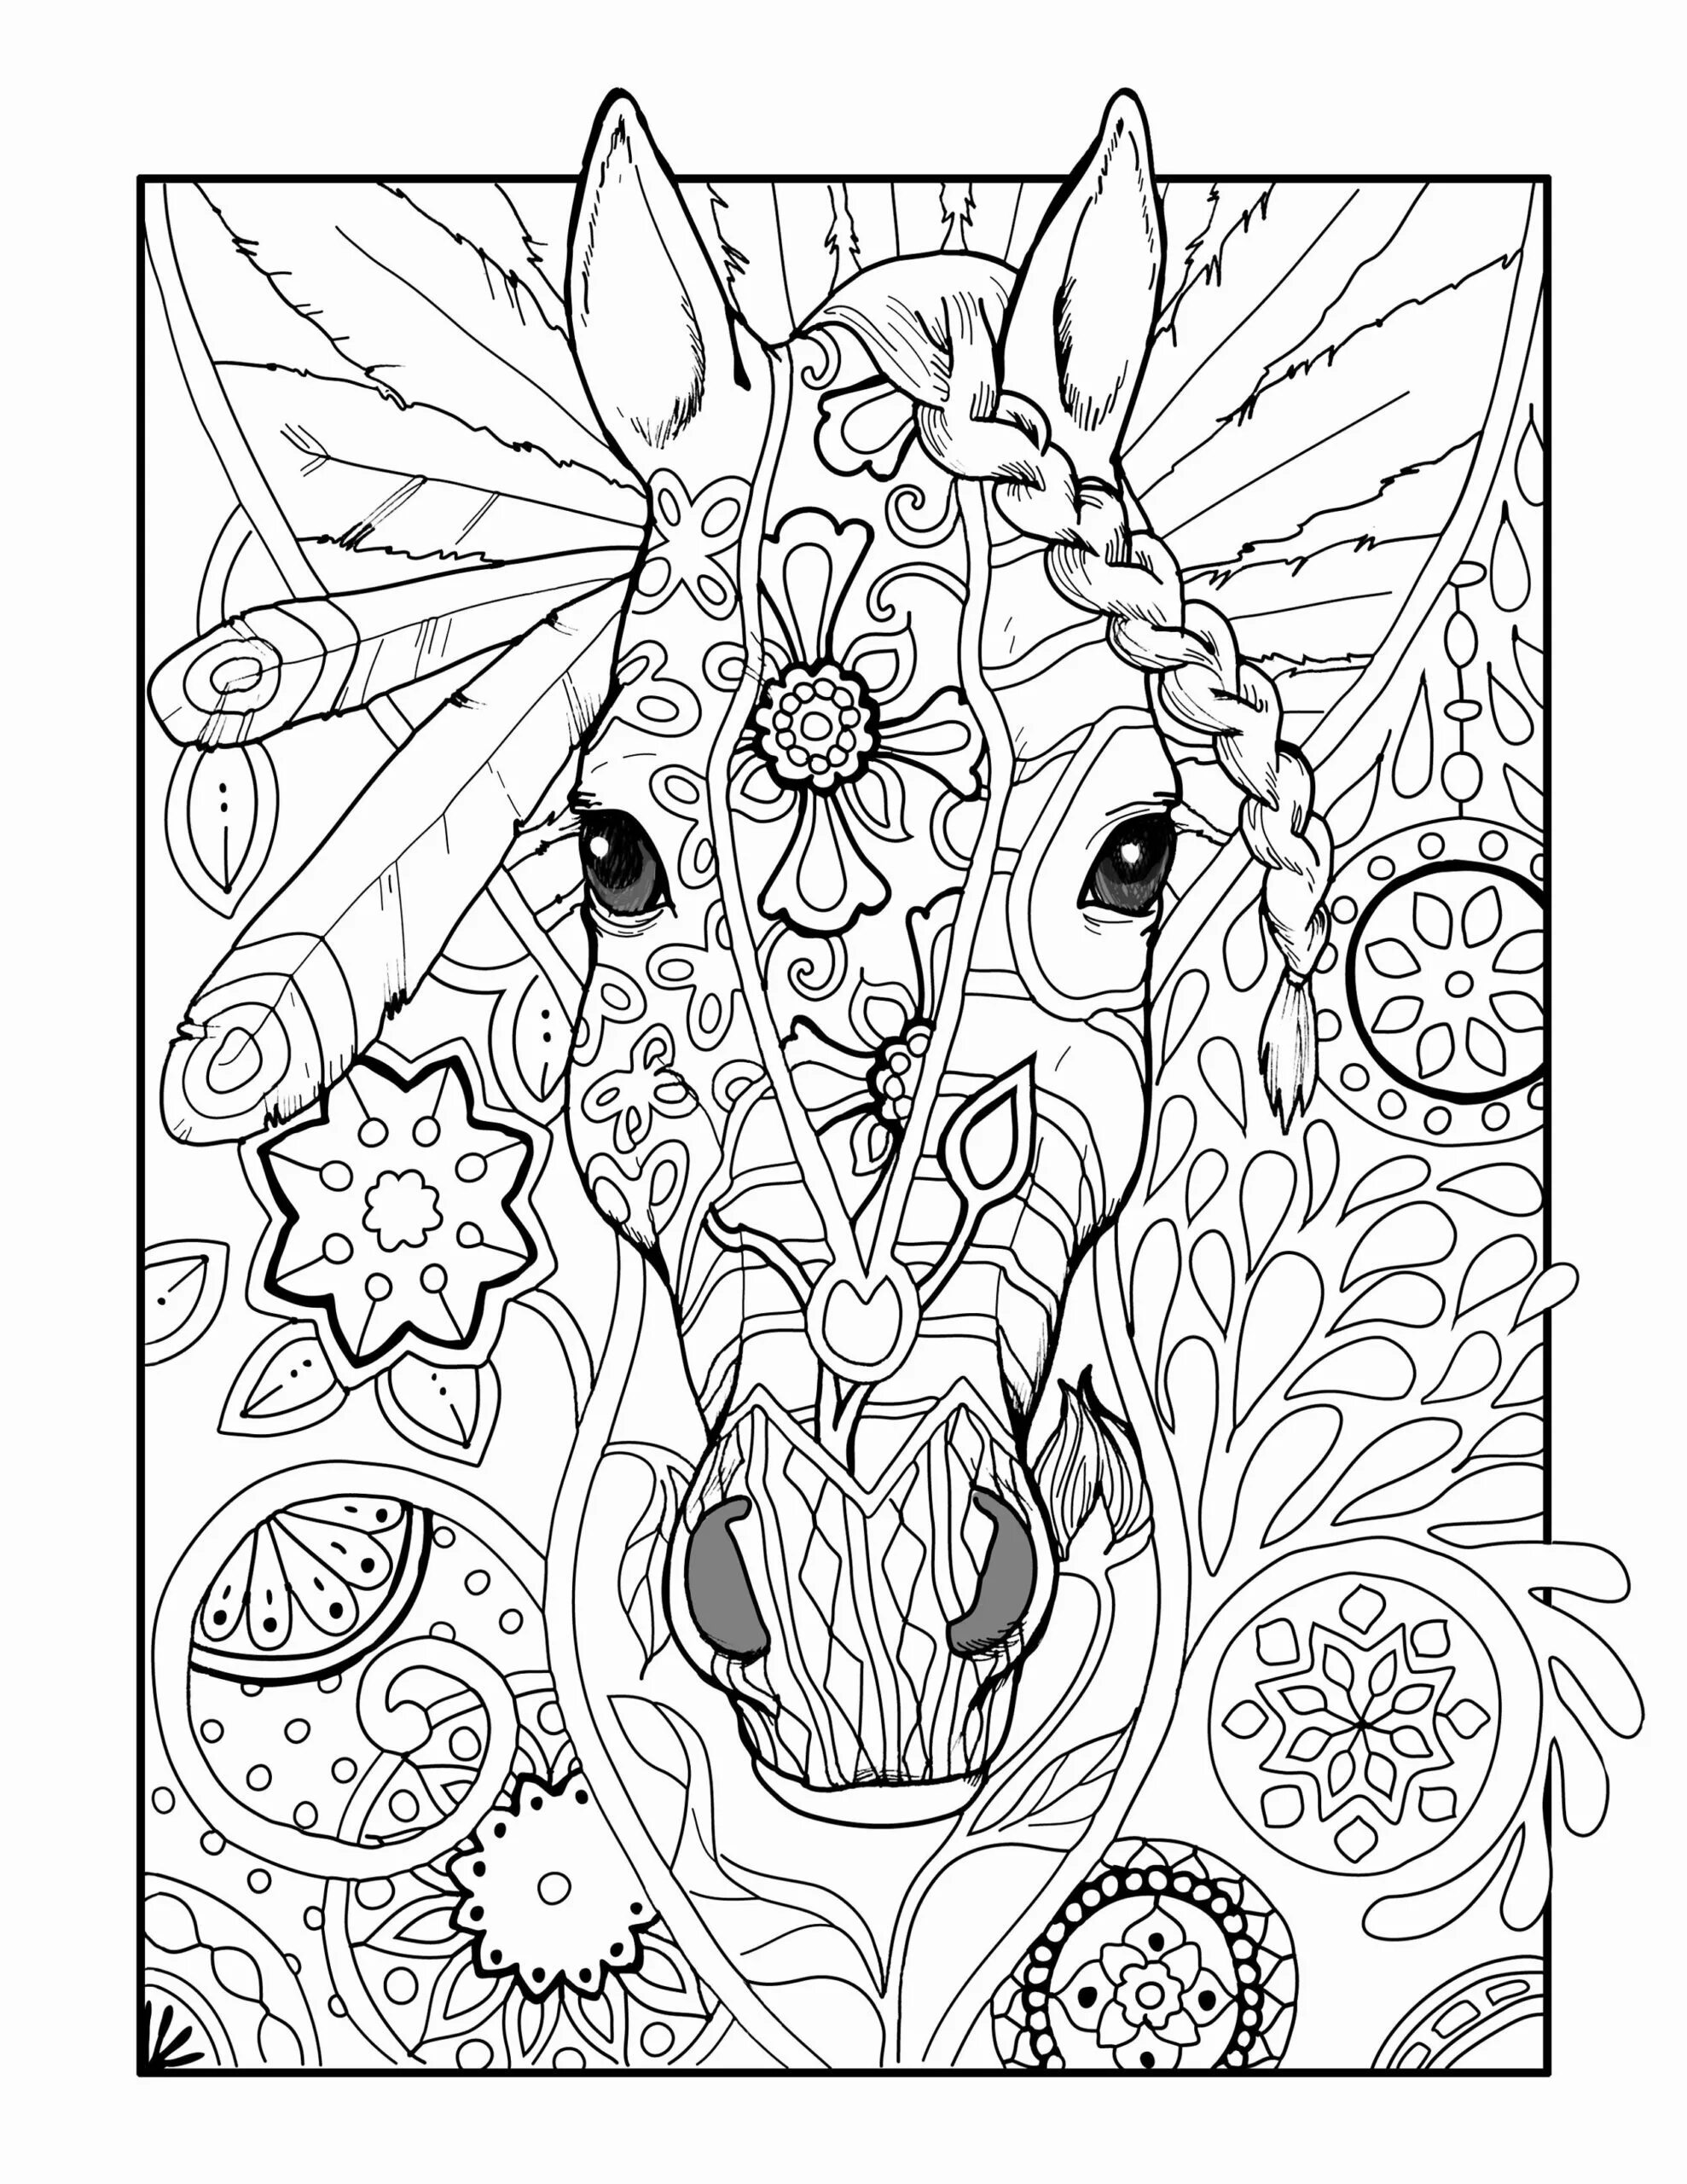 Encouraging coloring book for kids